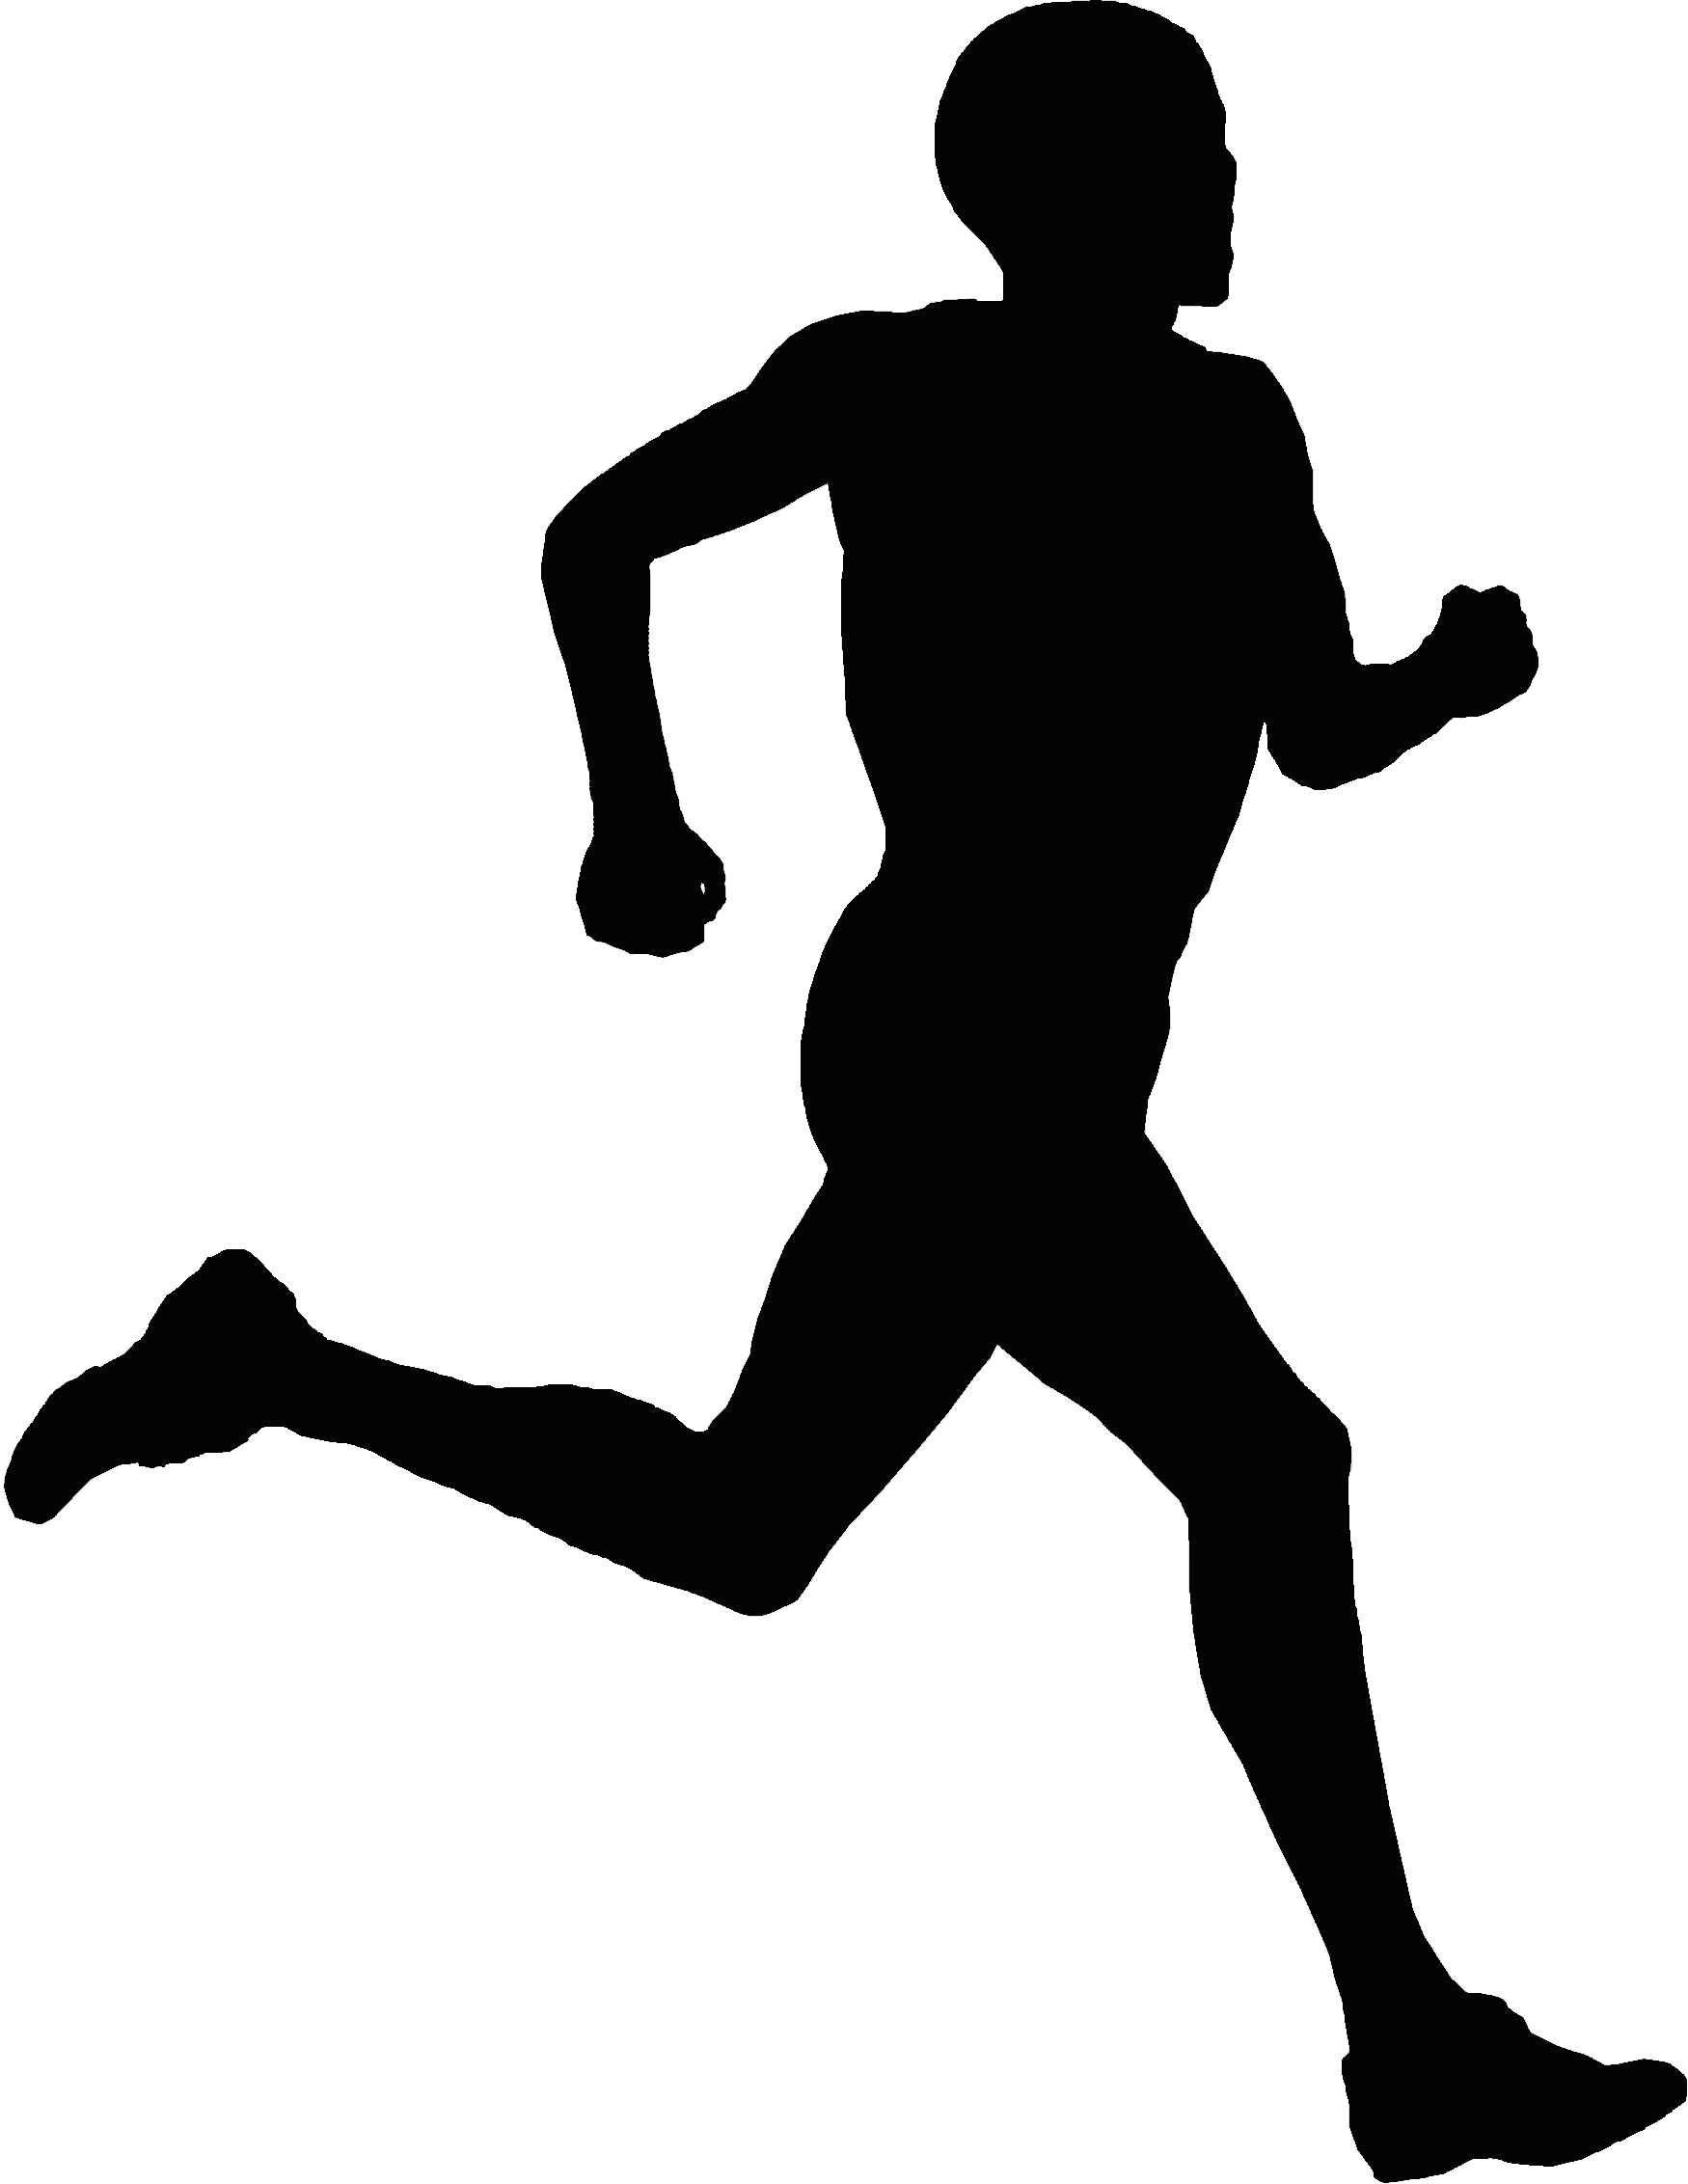 Runner free download clip art on clipart library.